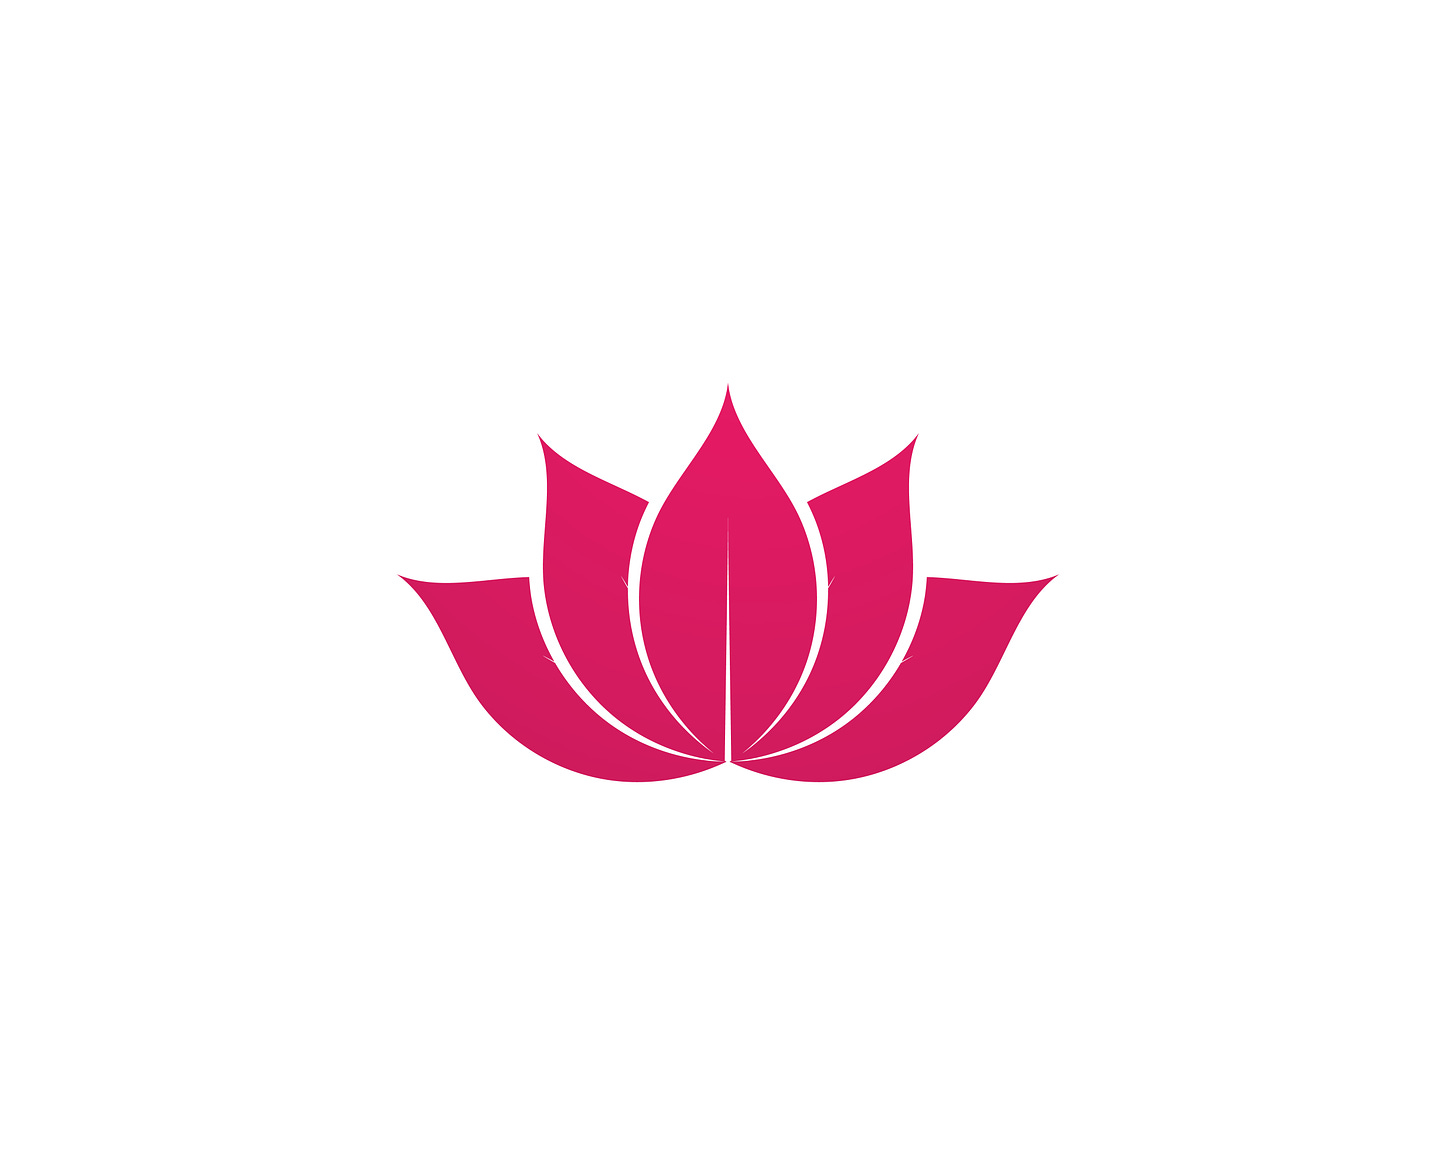 The lotus flower symbolizes rebirth, self-regeneration, enlightenment and the purity of heart and mind